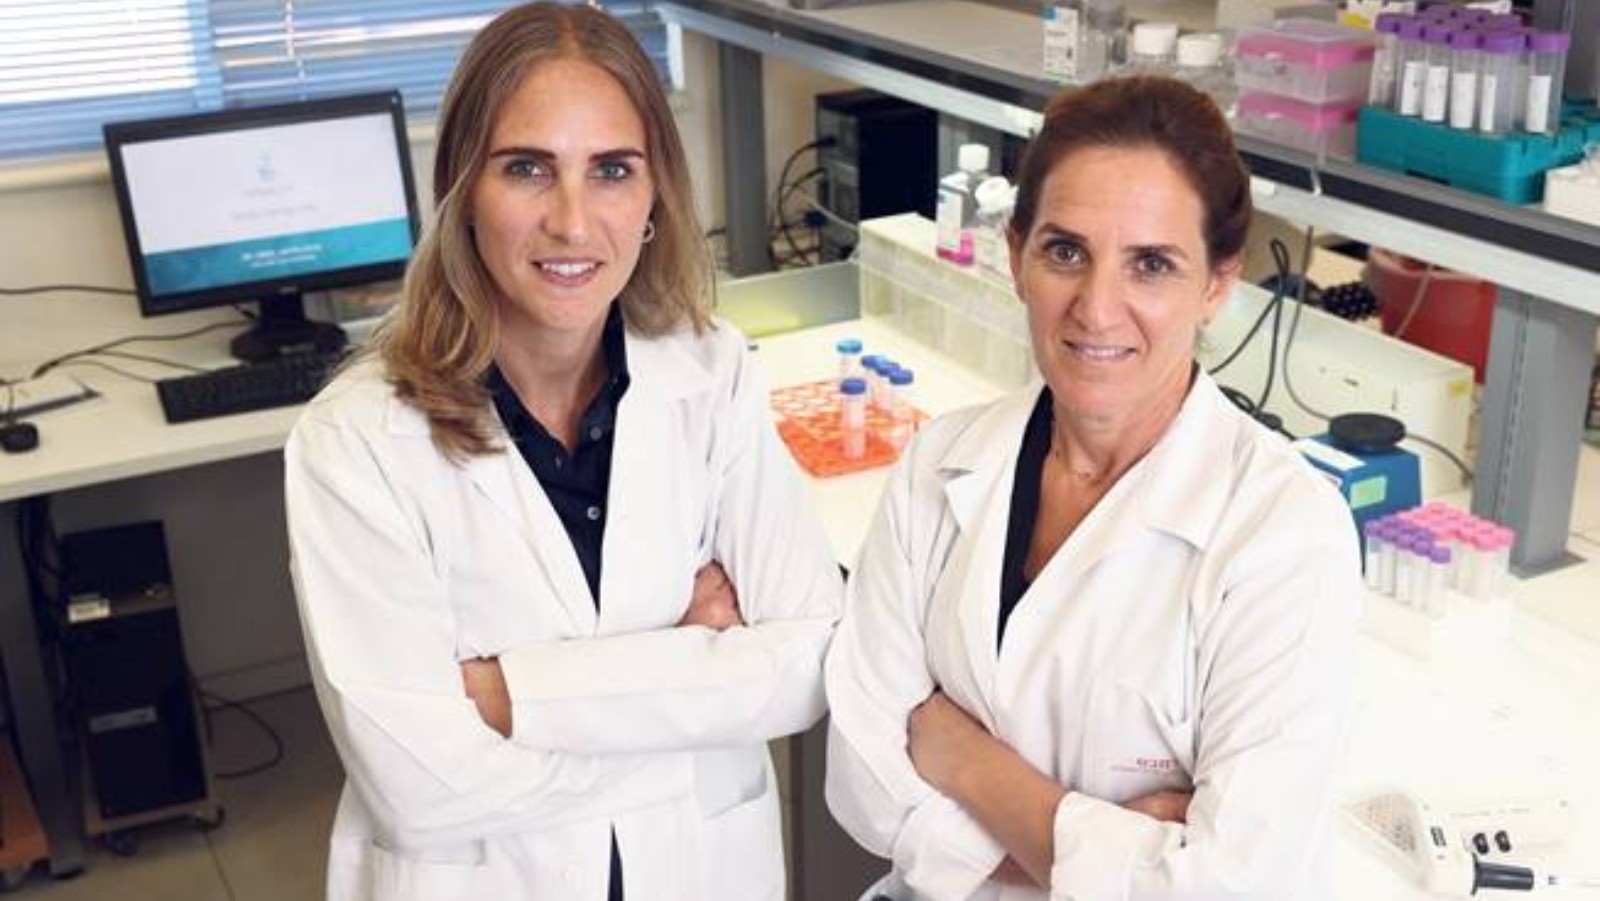 Dr. Inbal Zafir-Lavie, left, and Dr. Shlomit Yehudai-Reshef of Gina Life. They’re creating a revolutionary product to facilitate the early detection of many diseases affecting women, (Courtesy of Rambam Health Care Campus)